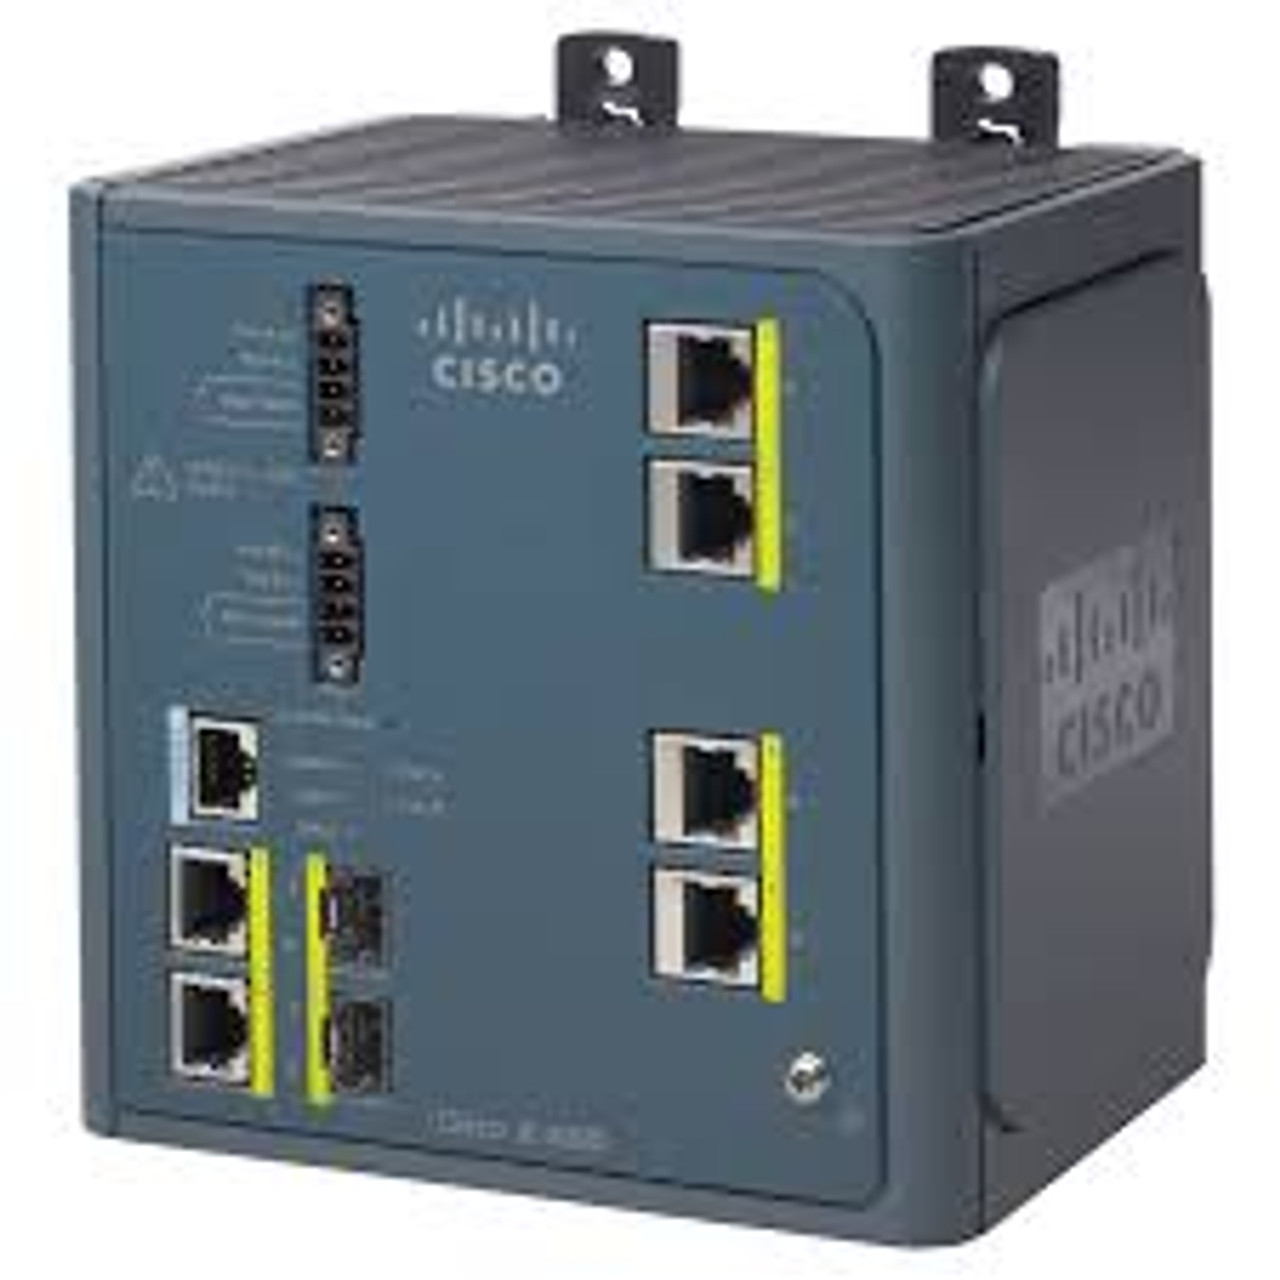 Cisco Industrial Ethernet 3000 Series Switch 4 Ports Managed